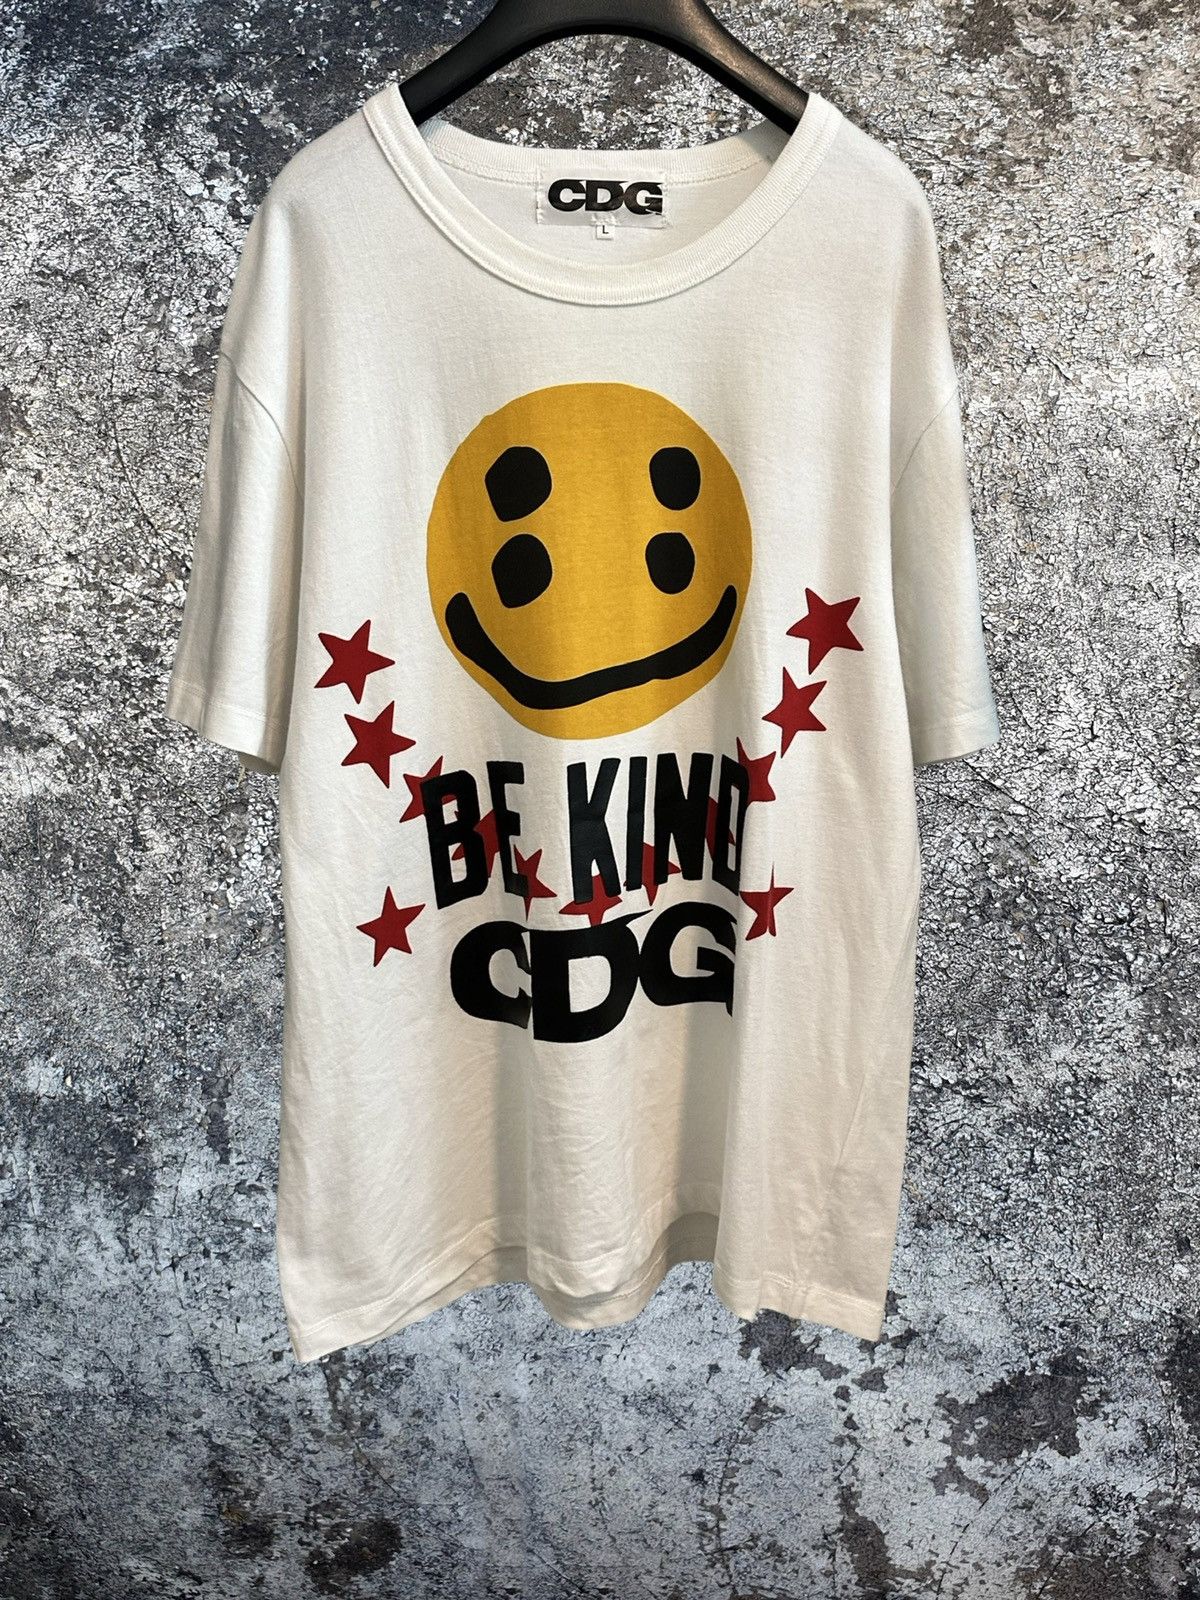 Comme des Garcons CDG x CPFM Be Kind Tee | Grailed